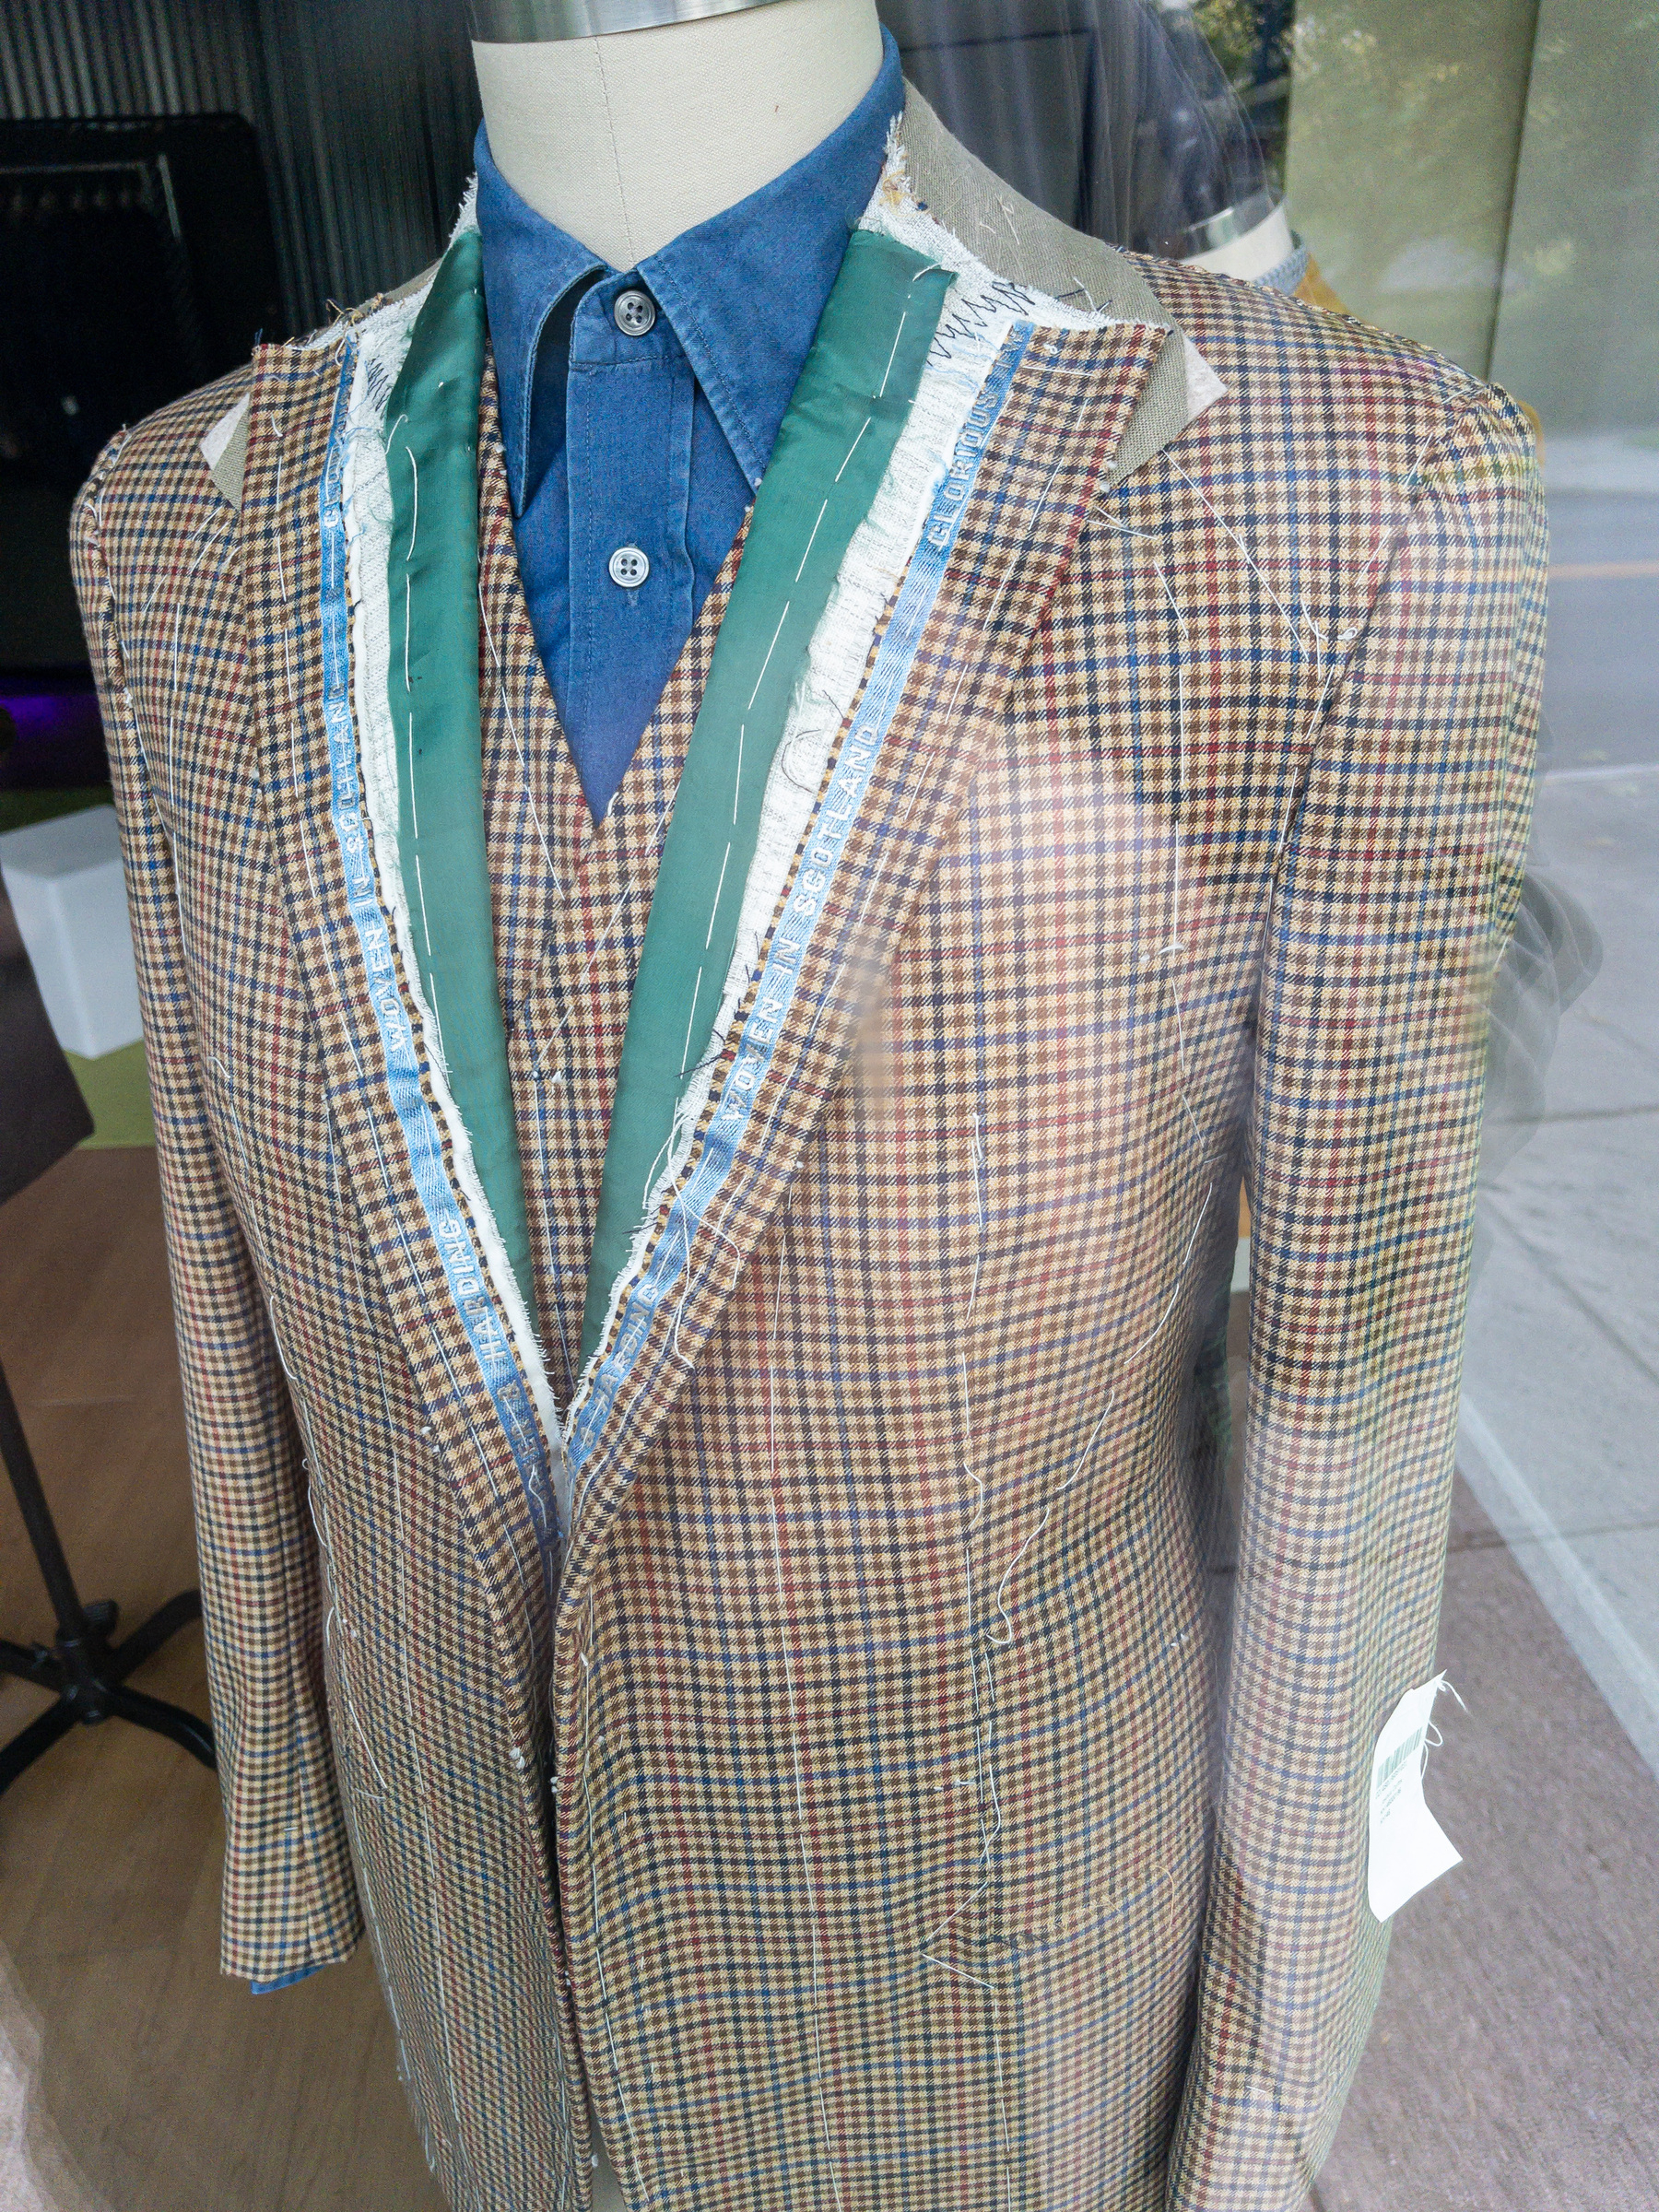 Partially finished men’s plaid dress jacket in a tailor shop window.